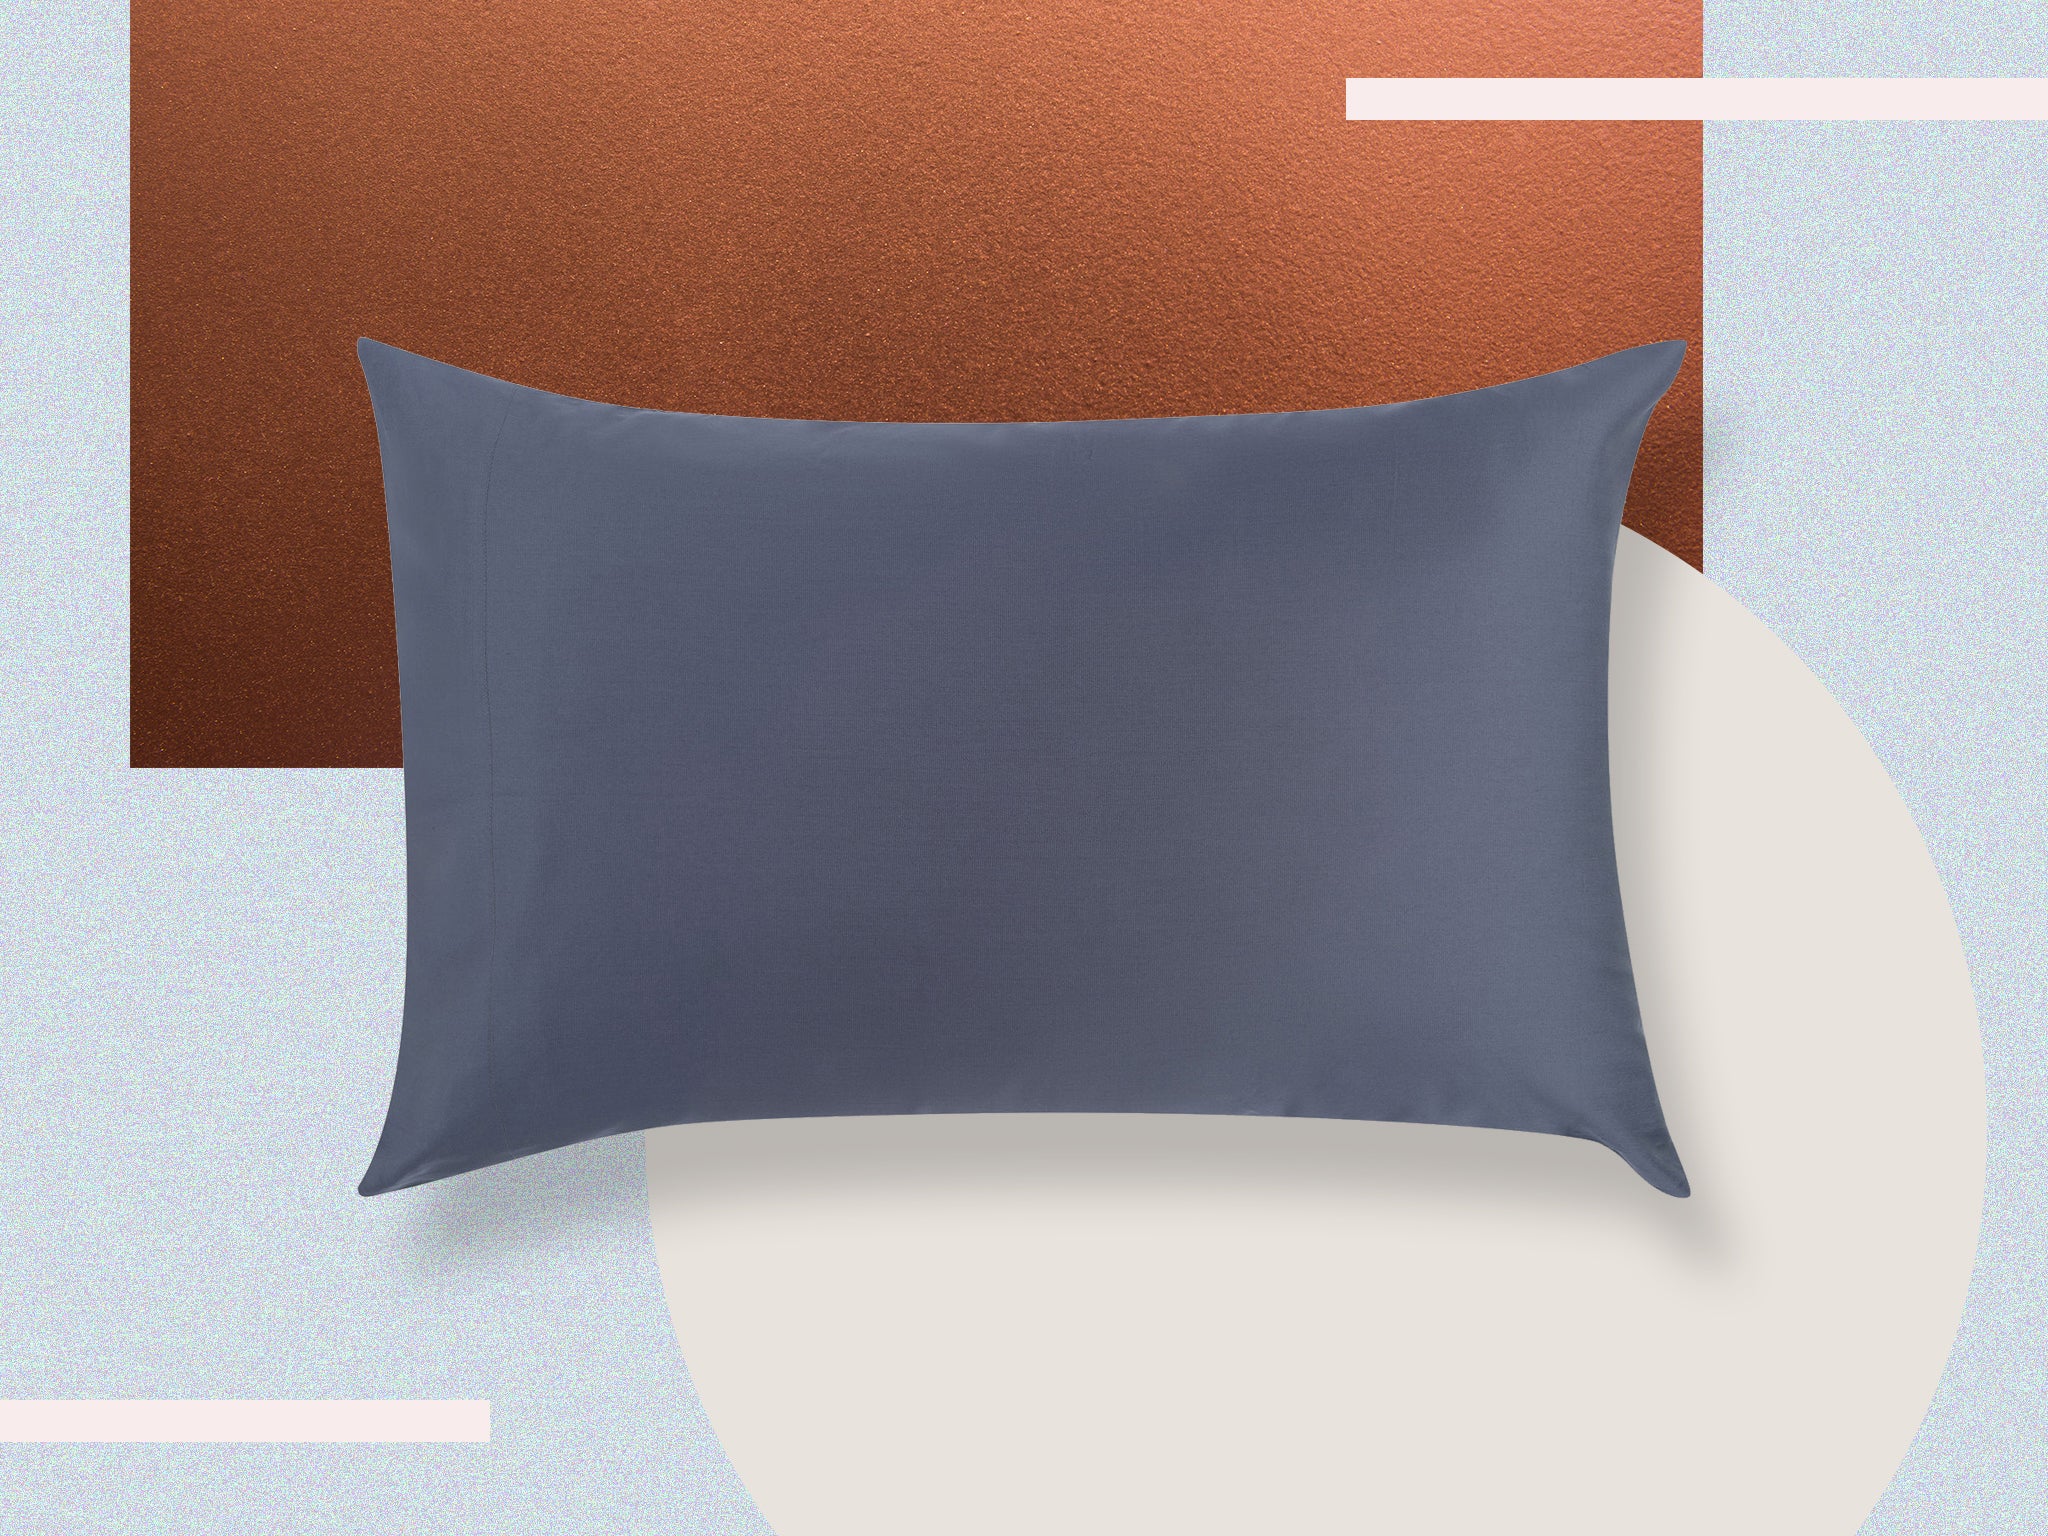 We used this pillowcase every night for just under a month